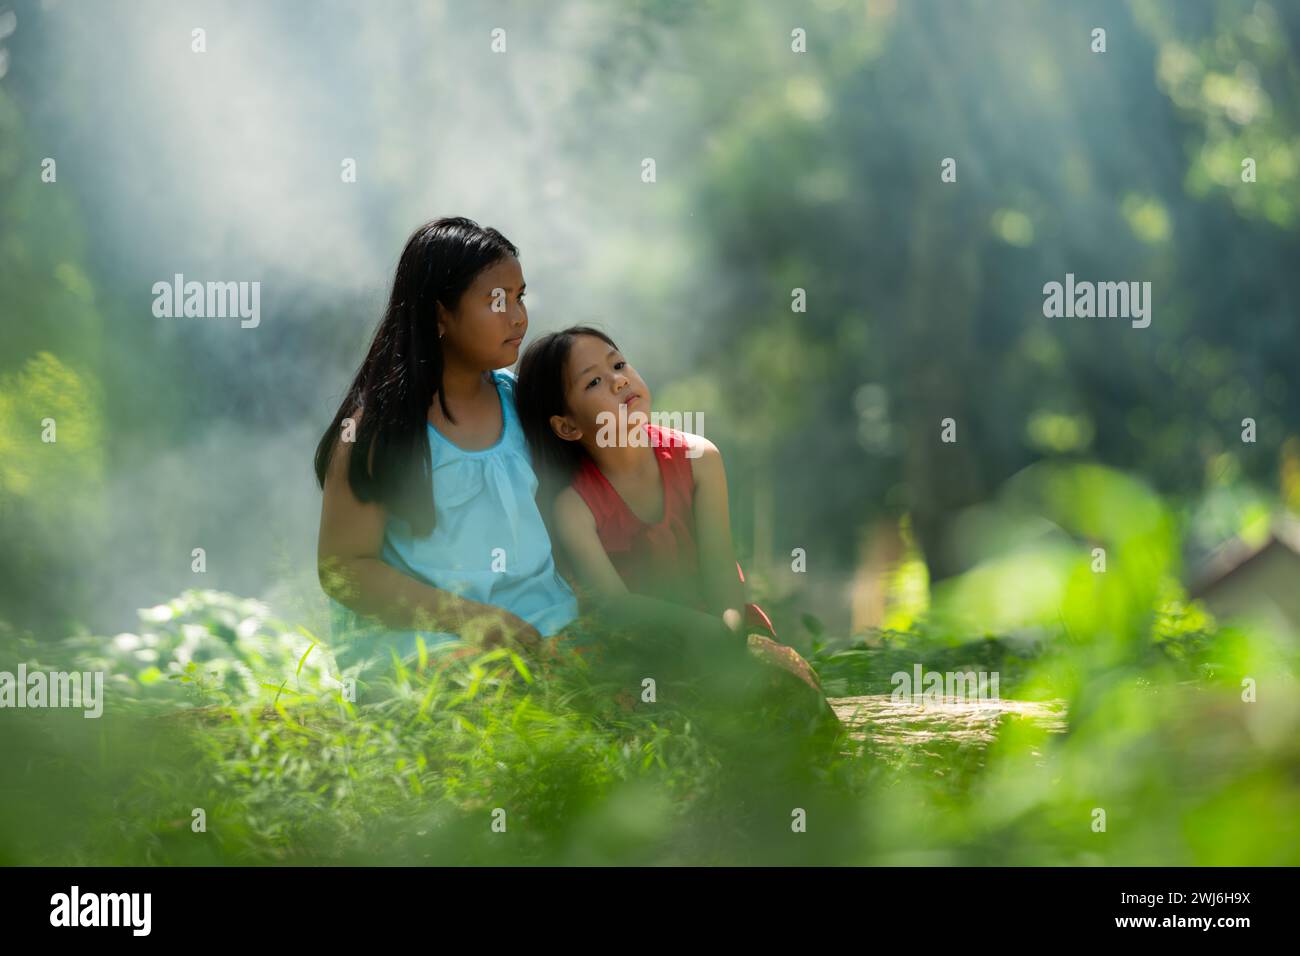 Two girls Asian women with traditional clothing stand had fun playing together in the rainforest. Stock Photo